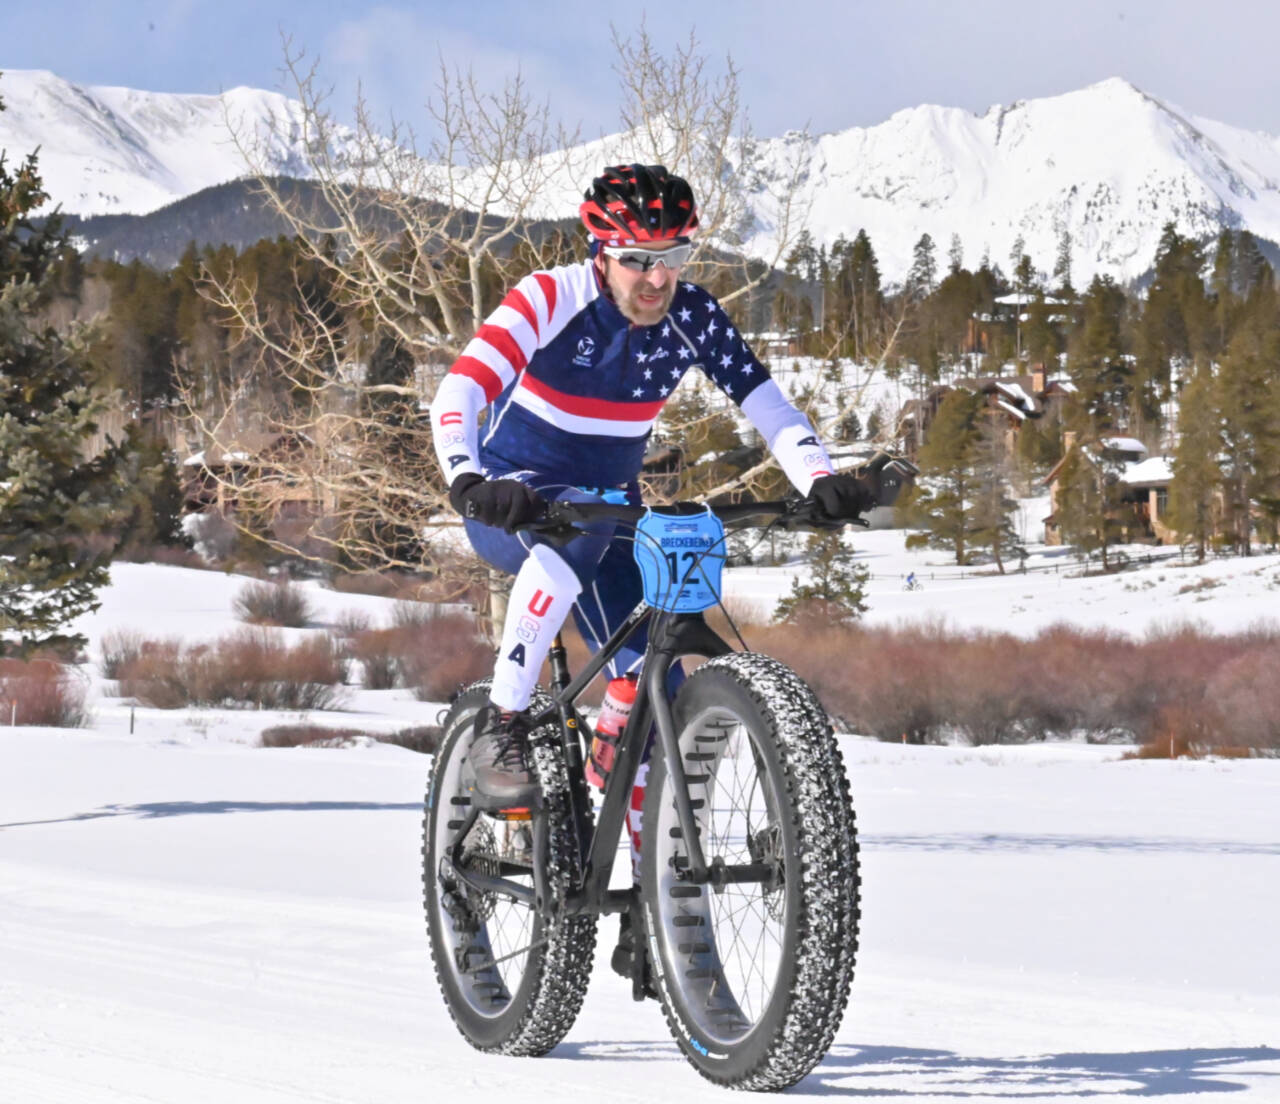 Dave Lasorsa of Port Angeles competed in the winter triathlon championship in Breckenridge, Colo., on Feb. 23, finishing second in his age group in the duathlon and third in the triathlon. (Courtesy photo)